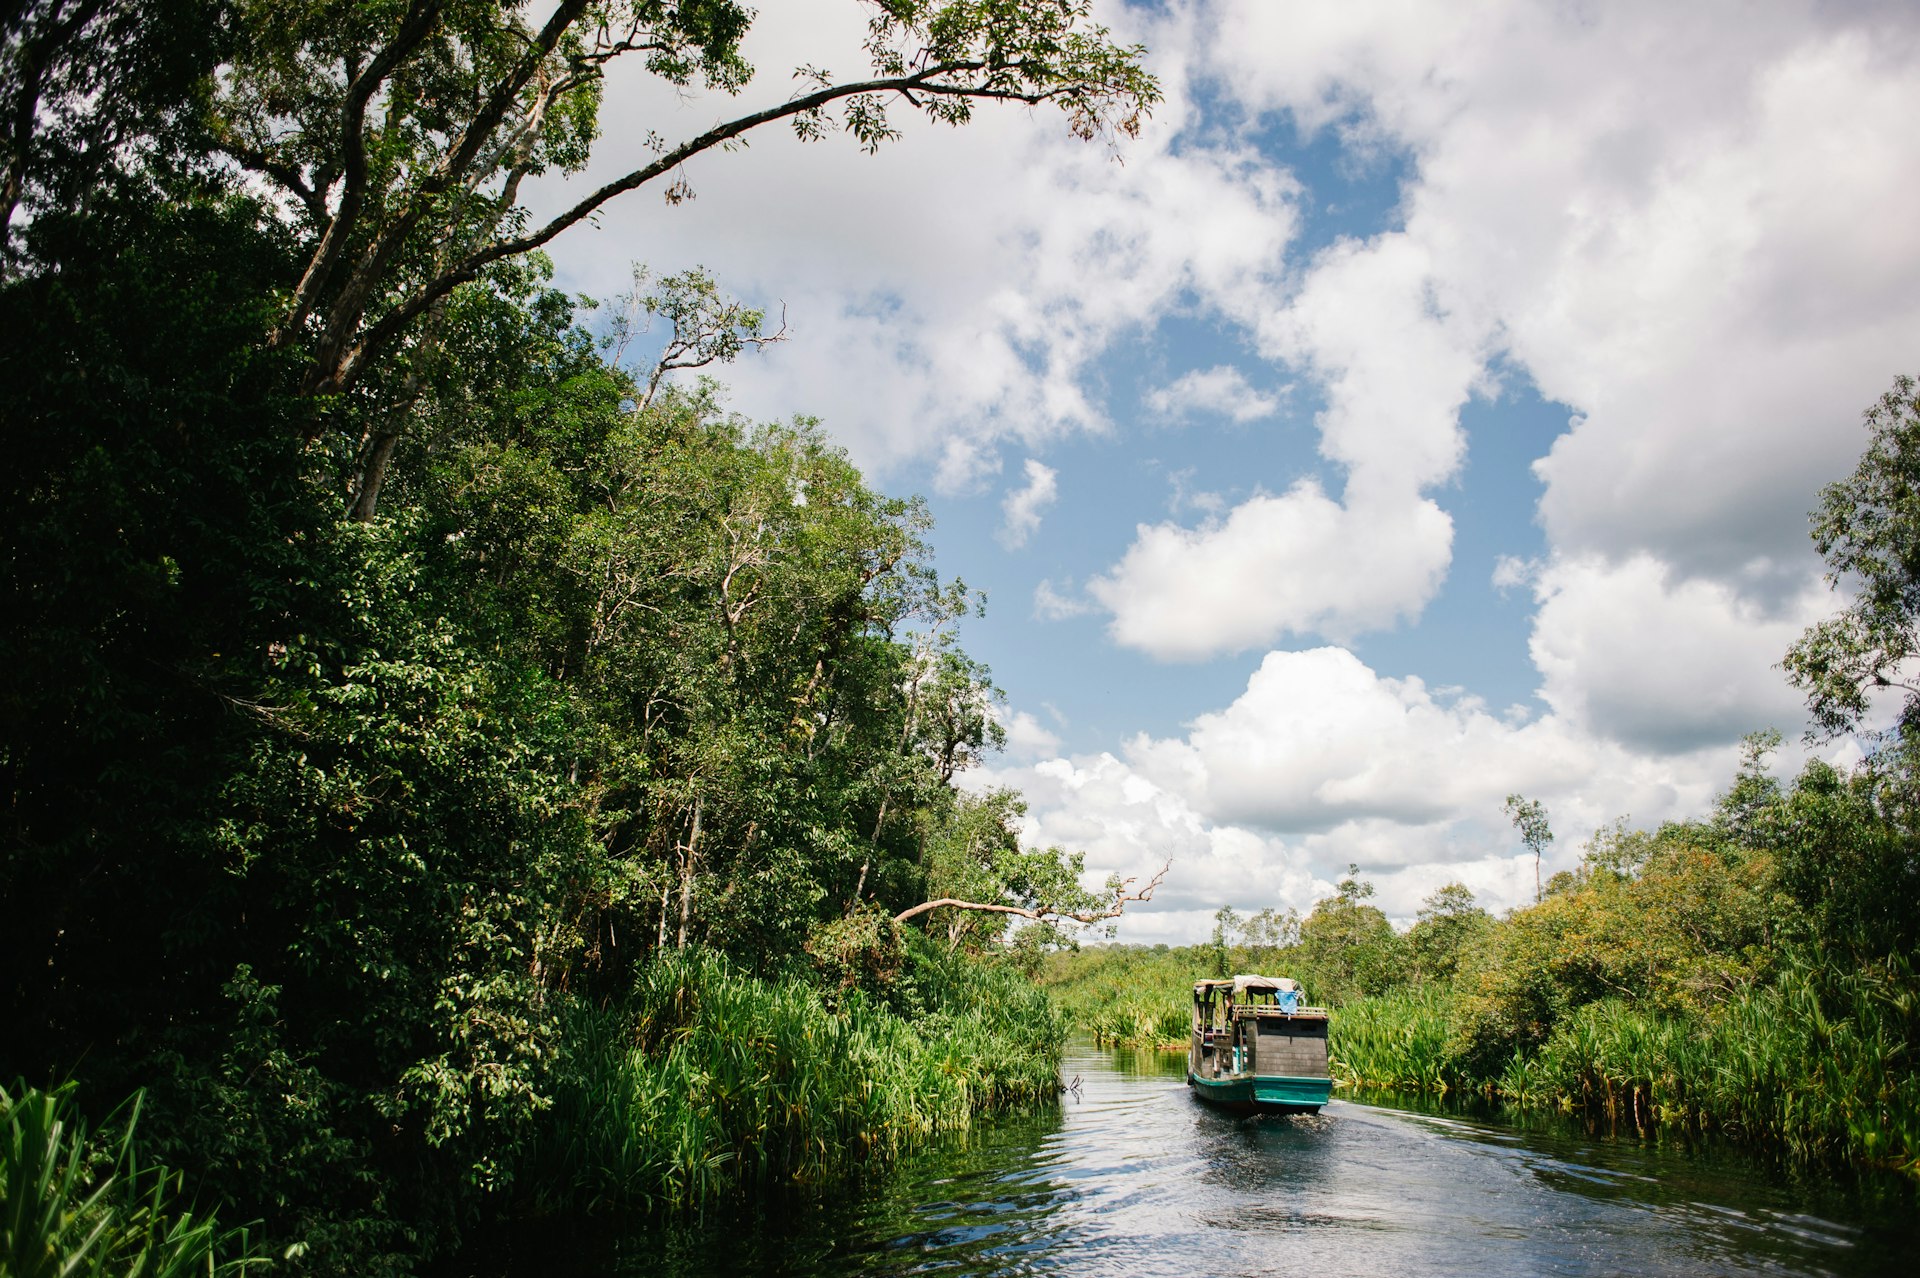 A klotok (a traditional river boat) travels on a river in Tanjung Puting National Park